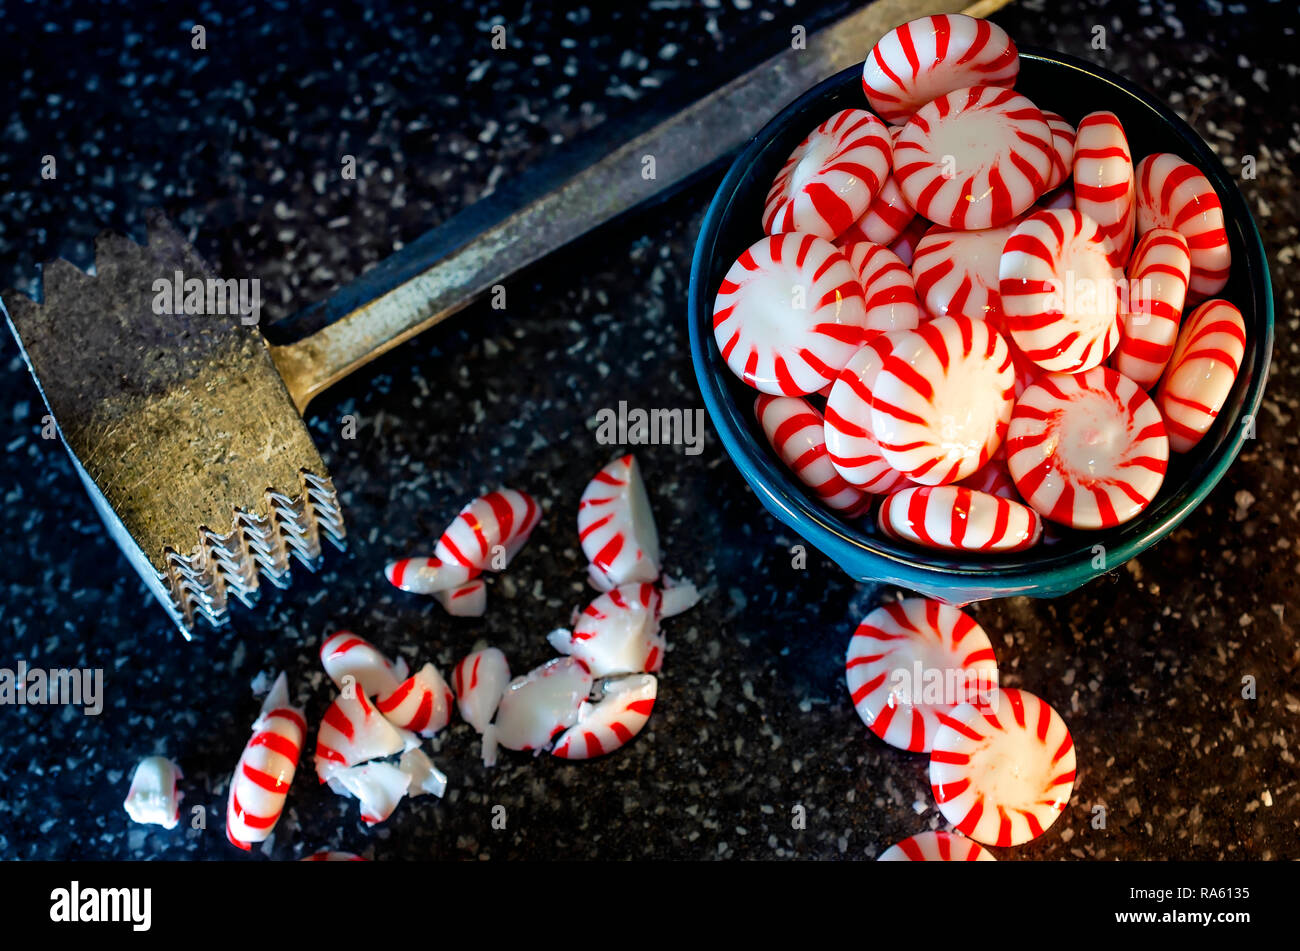 Peppermint candy is crushed with a vintage meat tenderizer mallet in preparation to make peppermint bark, Dec. 31, 2018, in Coden, Alabama. Stock Photo